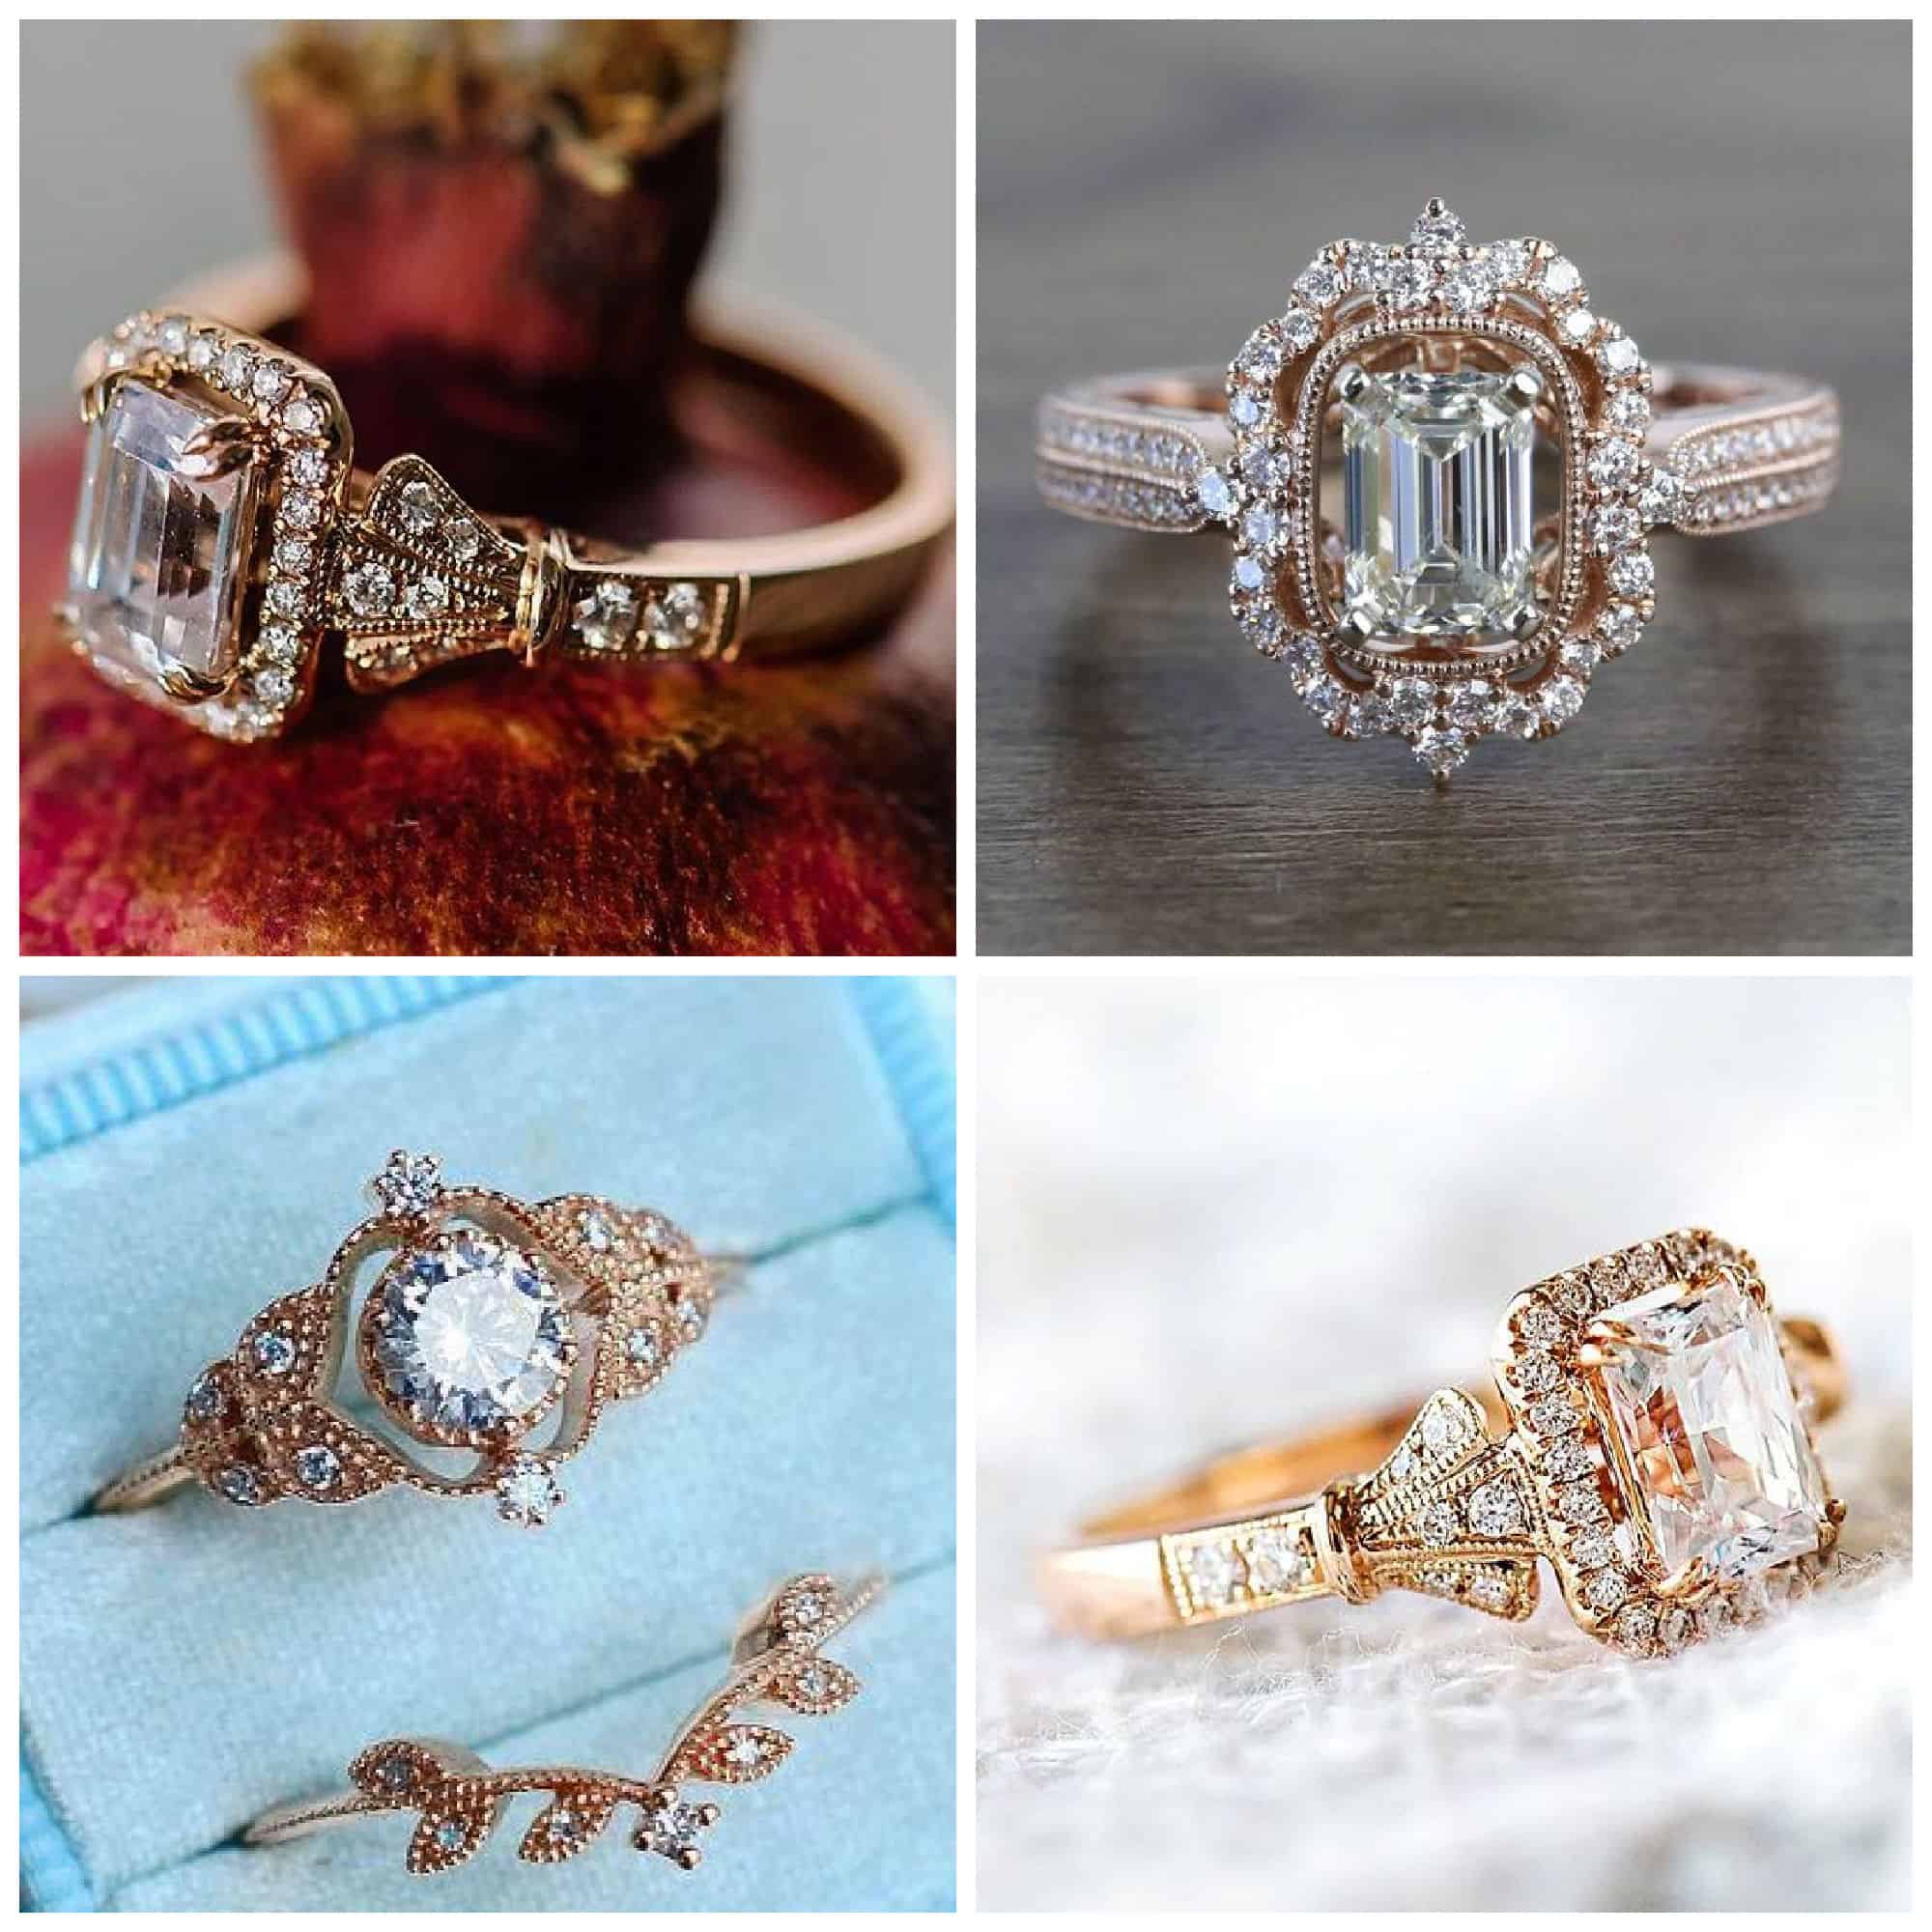 5 Unusual Engagement Ring Styles You Should Consider